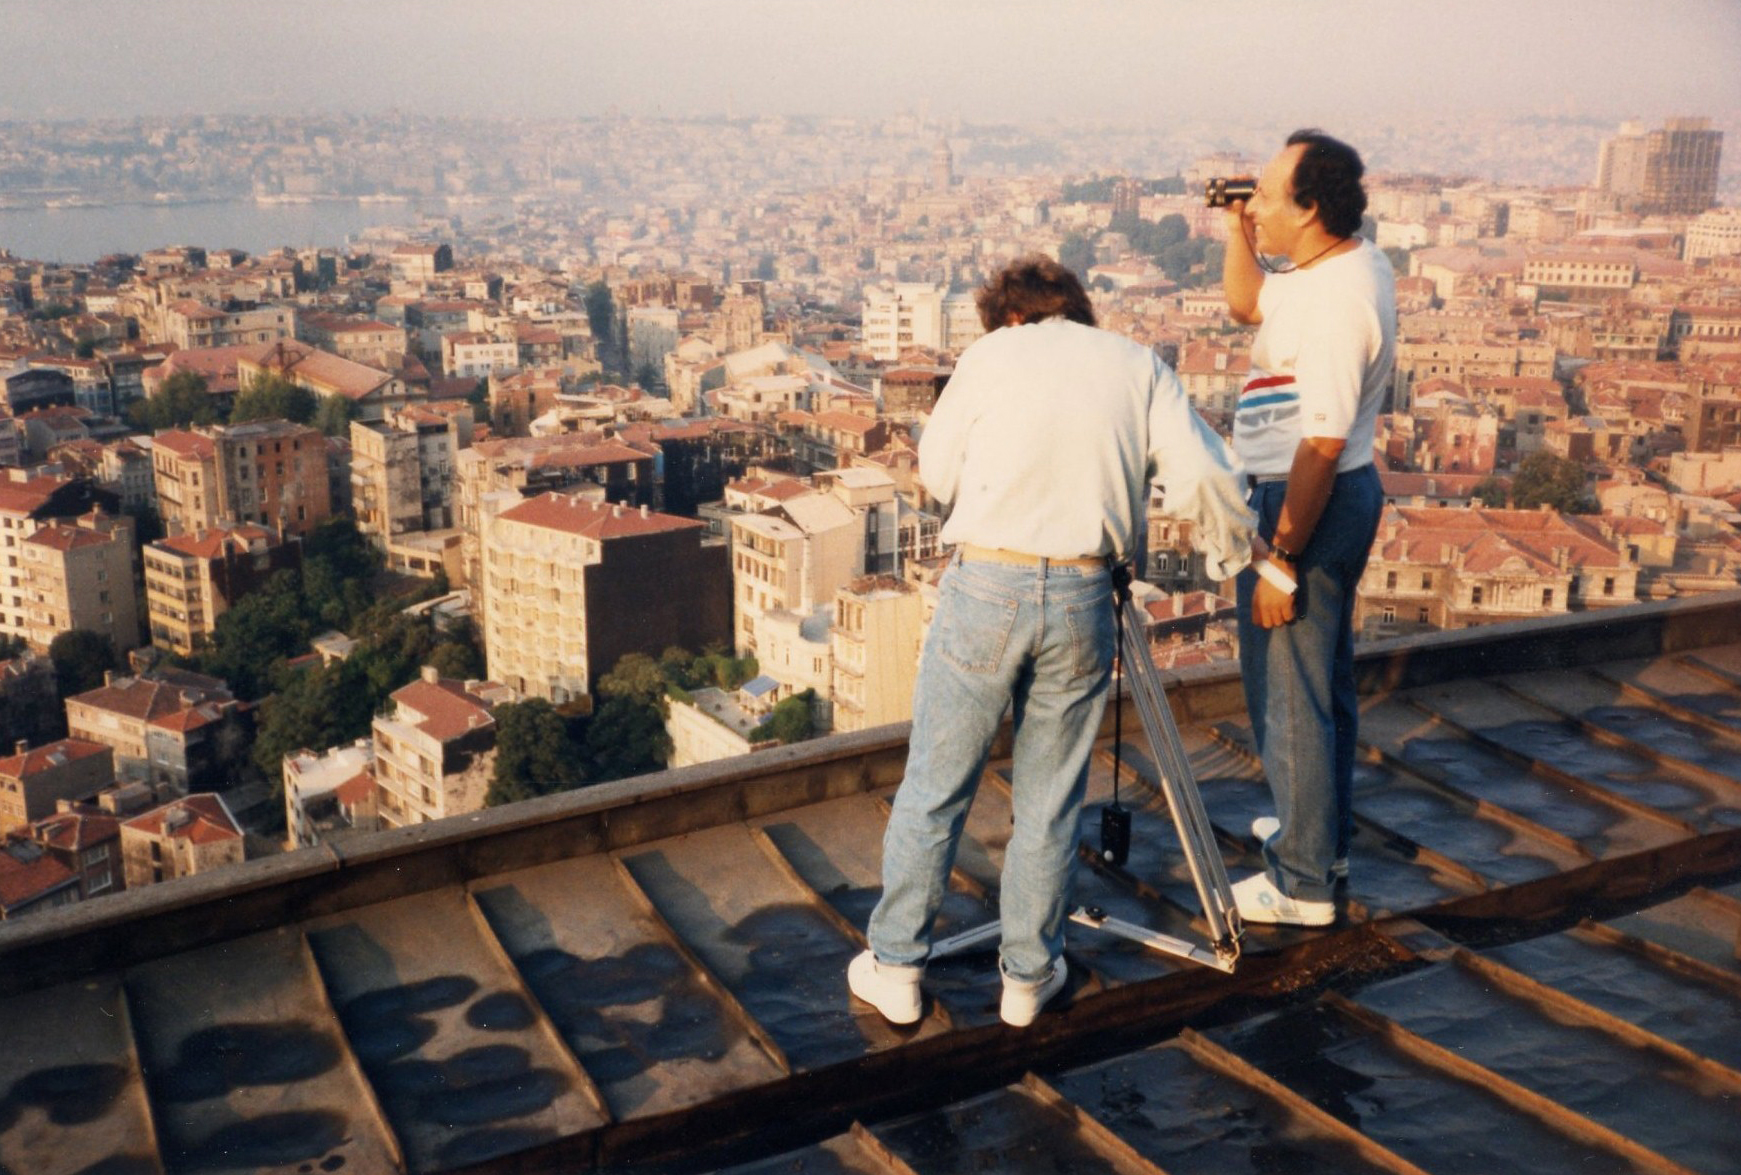 Lining up a panoramic shot of Istanbul with DP Michael Miles on 'Merhaba' location in 1987